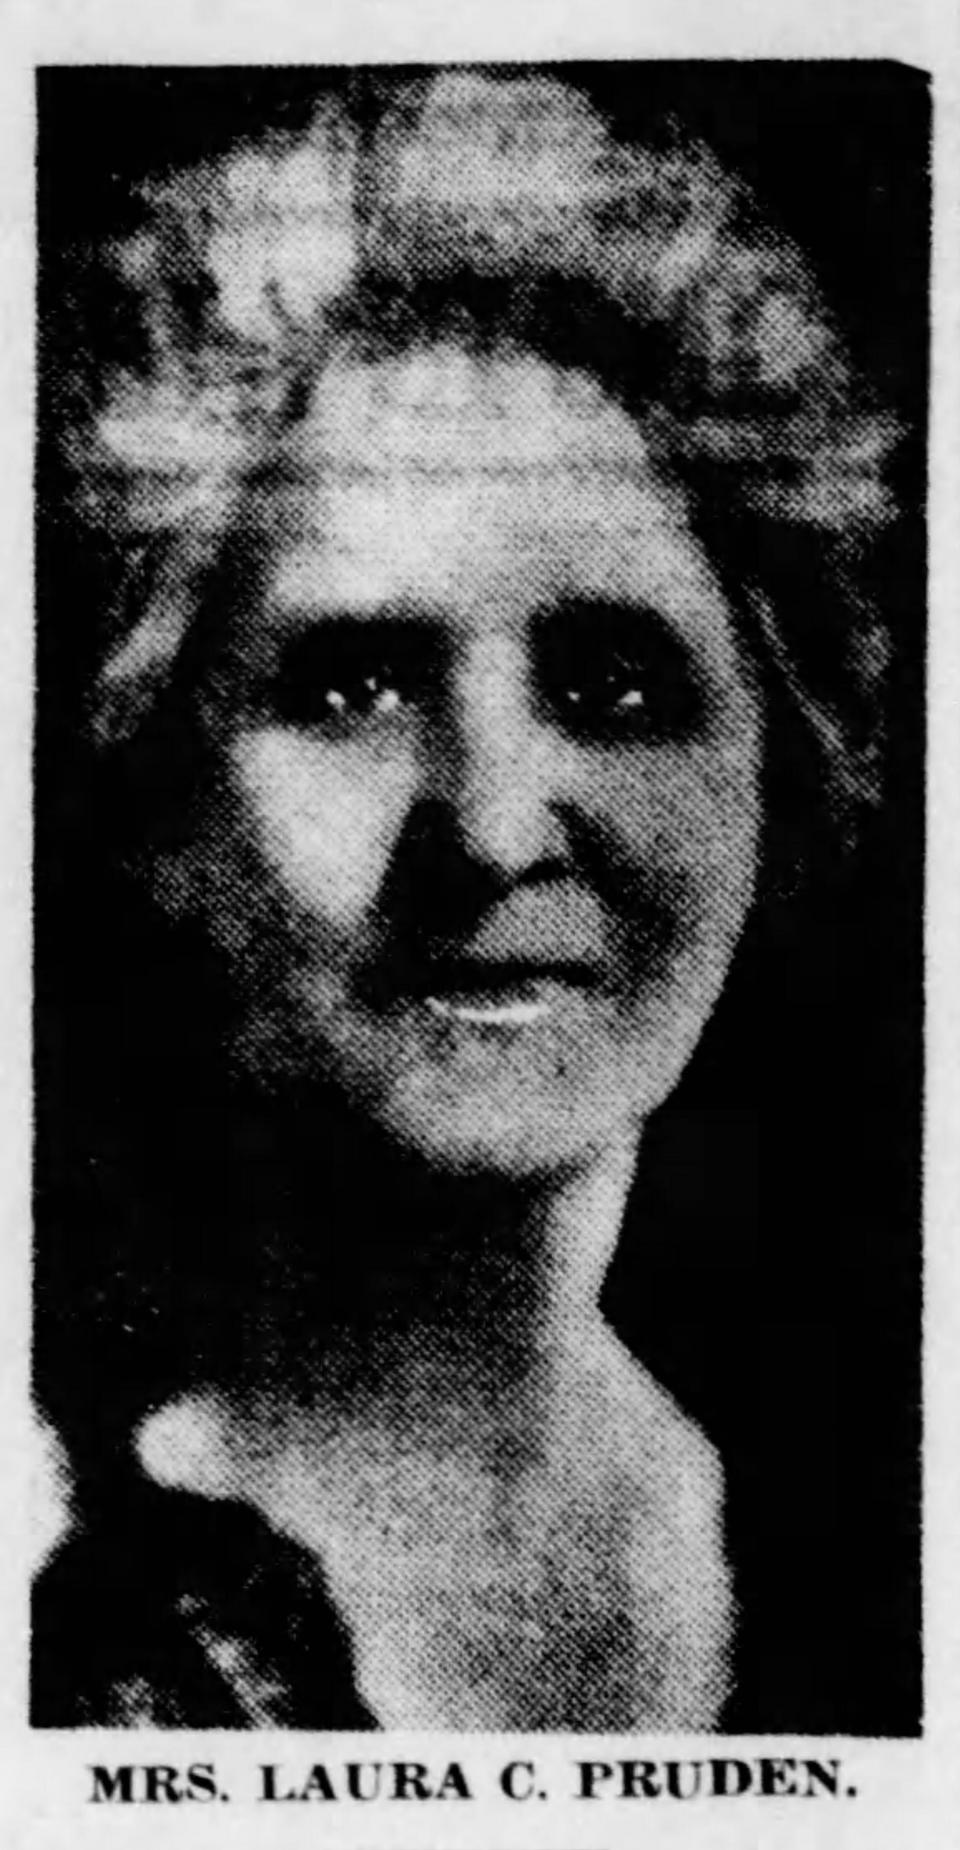 Spiritualist and medium Laura Pruden of Price Hill was noted for her slate writing, in which she claimed to communicate with the dead.